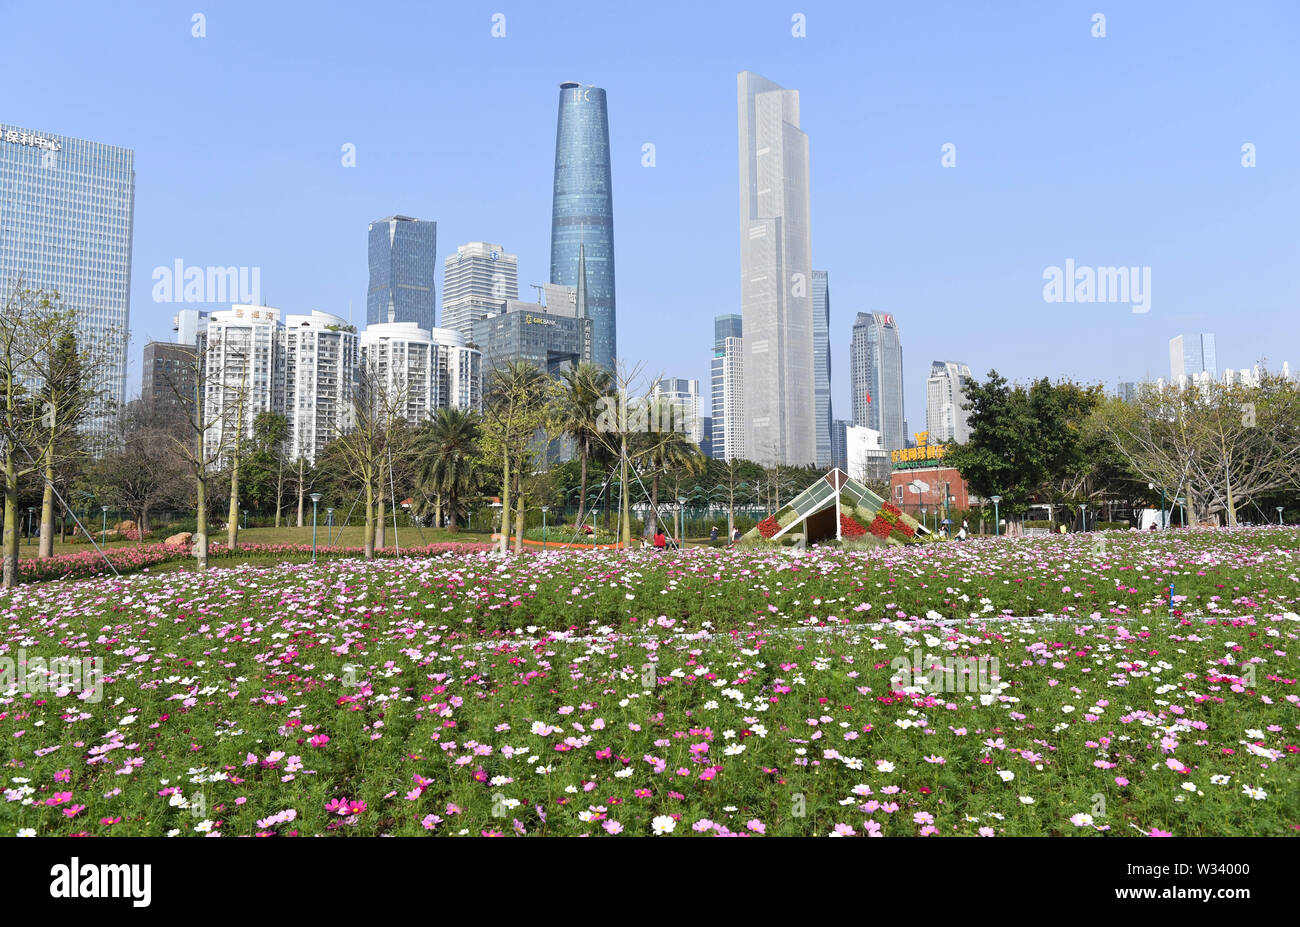 (190712) -- BEIJING, July 12, 2019 (Xinhua) -- Photo taken on March 3, 2019 shows Zhujiang New Town in Guangzhou, capital of south China's Guangdong Province. Located in south China, Guangdong Province faces the South China Sea and borders Hunan and Jiangxi provinces to the north. It boasts the well-known Pearl River Delta, which is composed of three upstream rivers and a large number of islands. Due to the climate, Guangdong is famous for a diversified ecological system and environment. In recent years, by upholding the principle of green development, Guangdong has made remarkable achievem Stock Photo